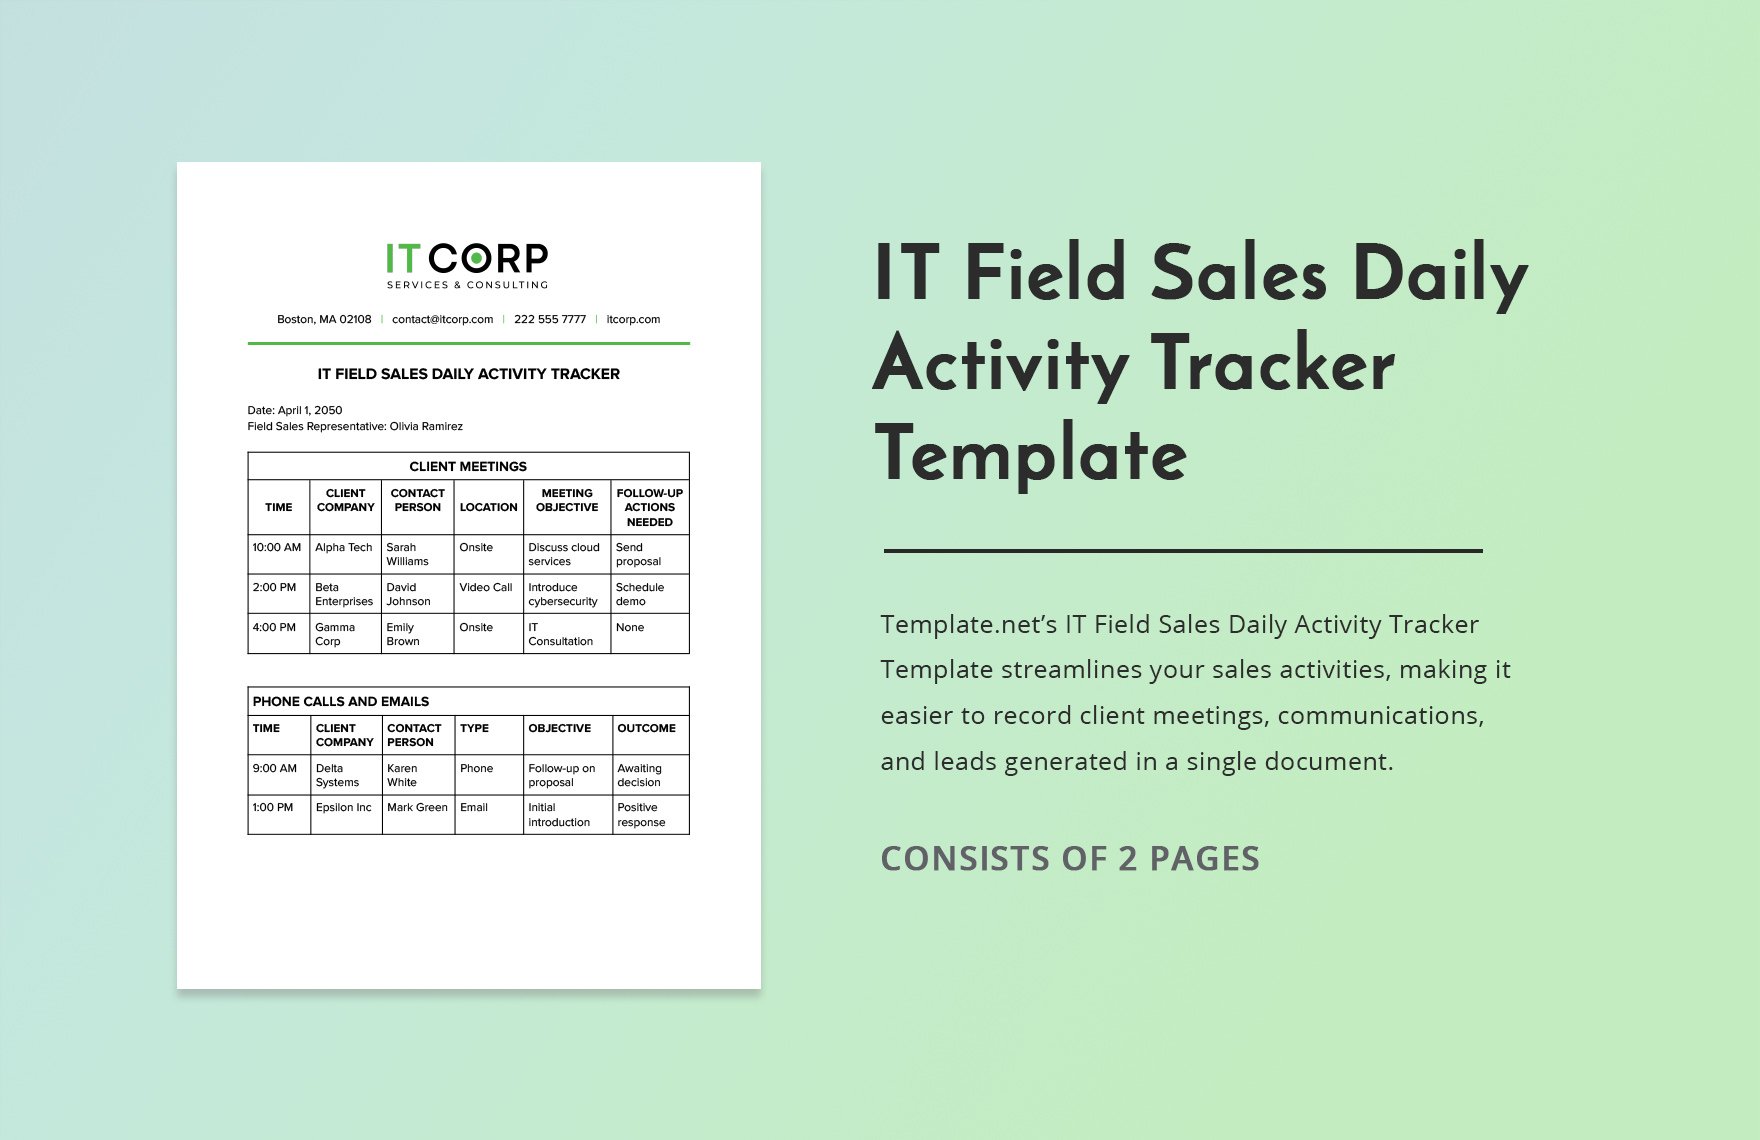 IT Field Sales Daily Activity Tracker Template